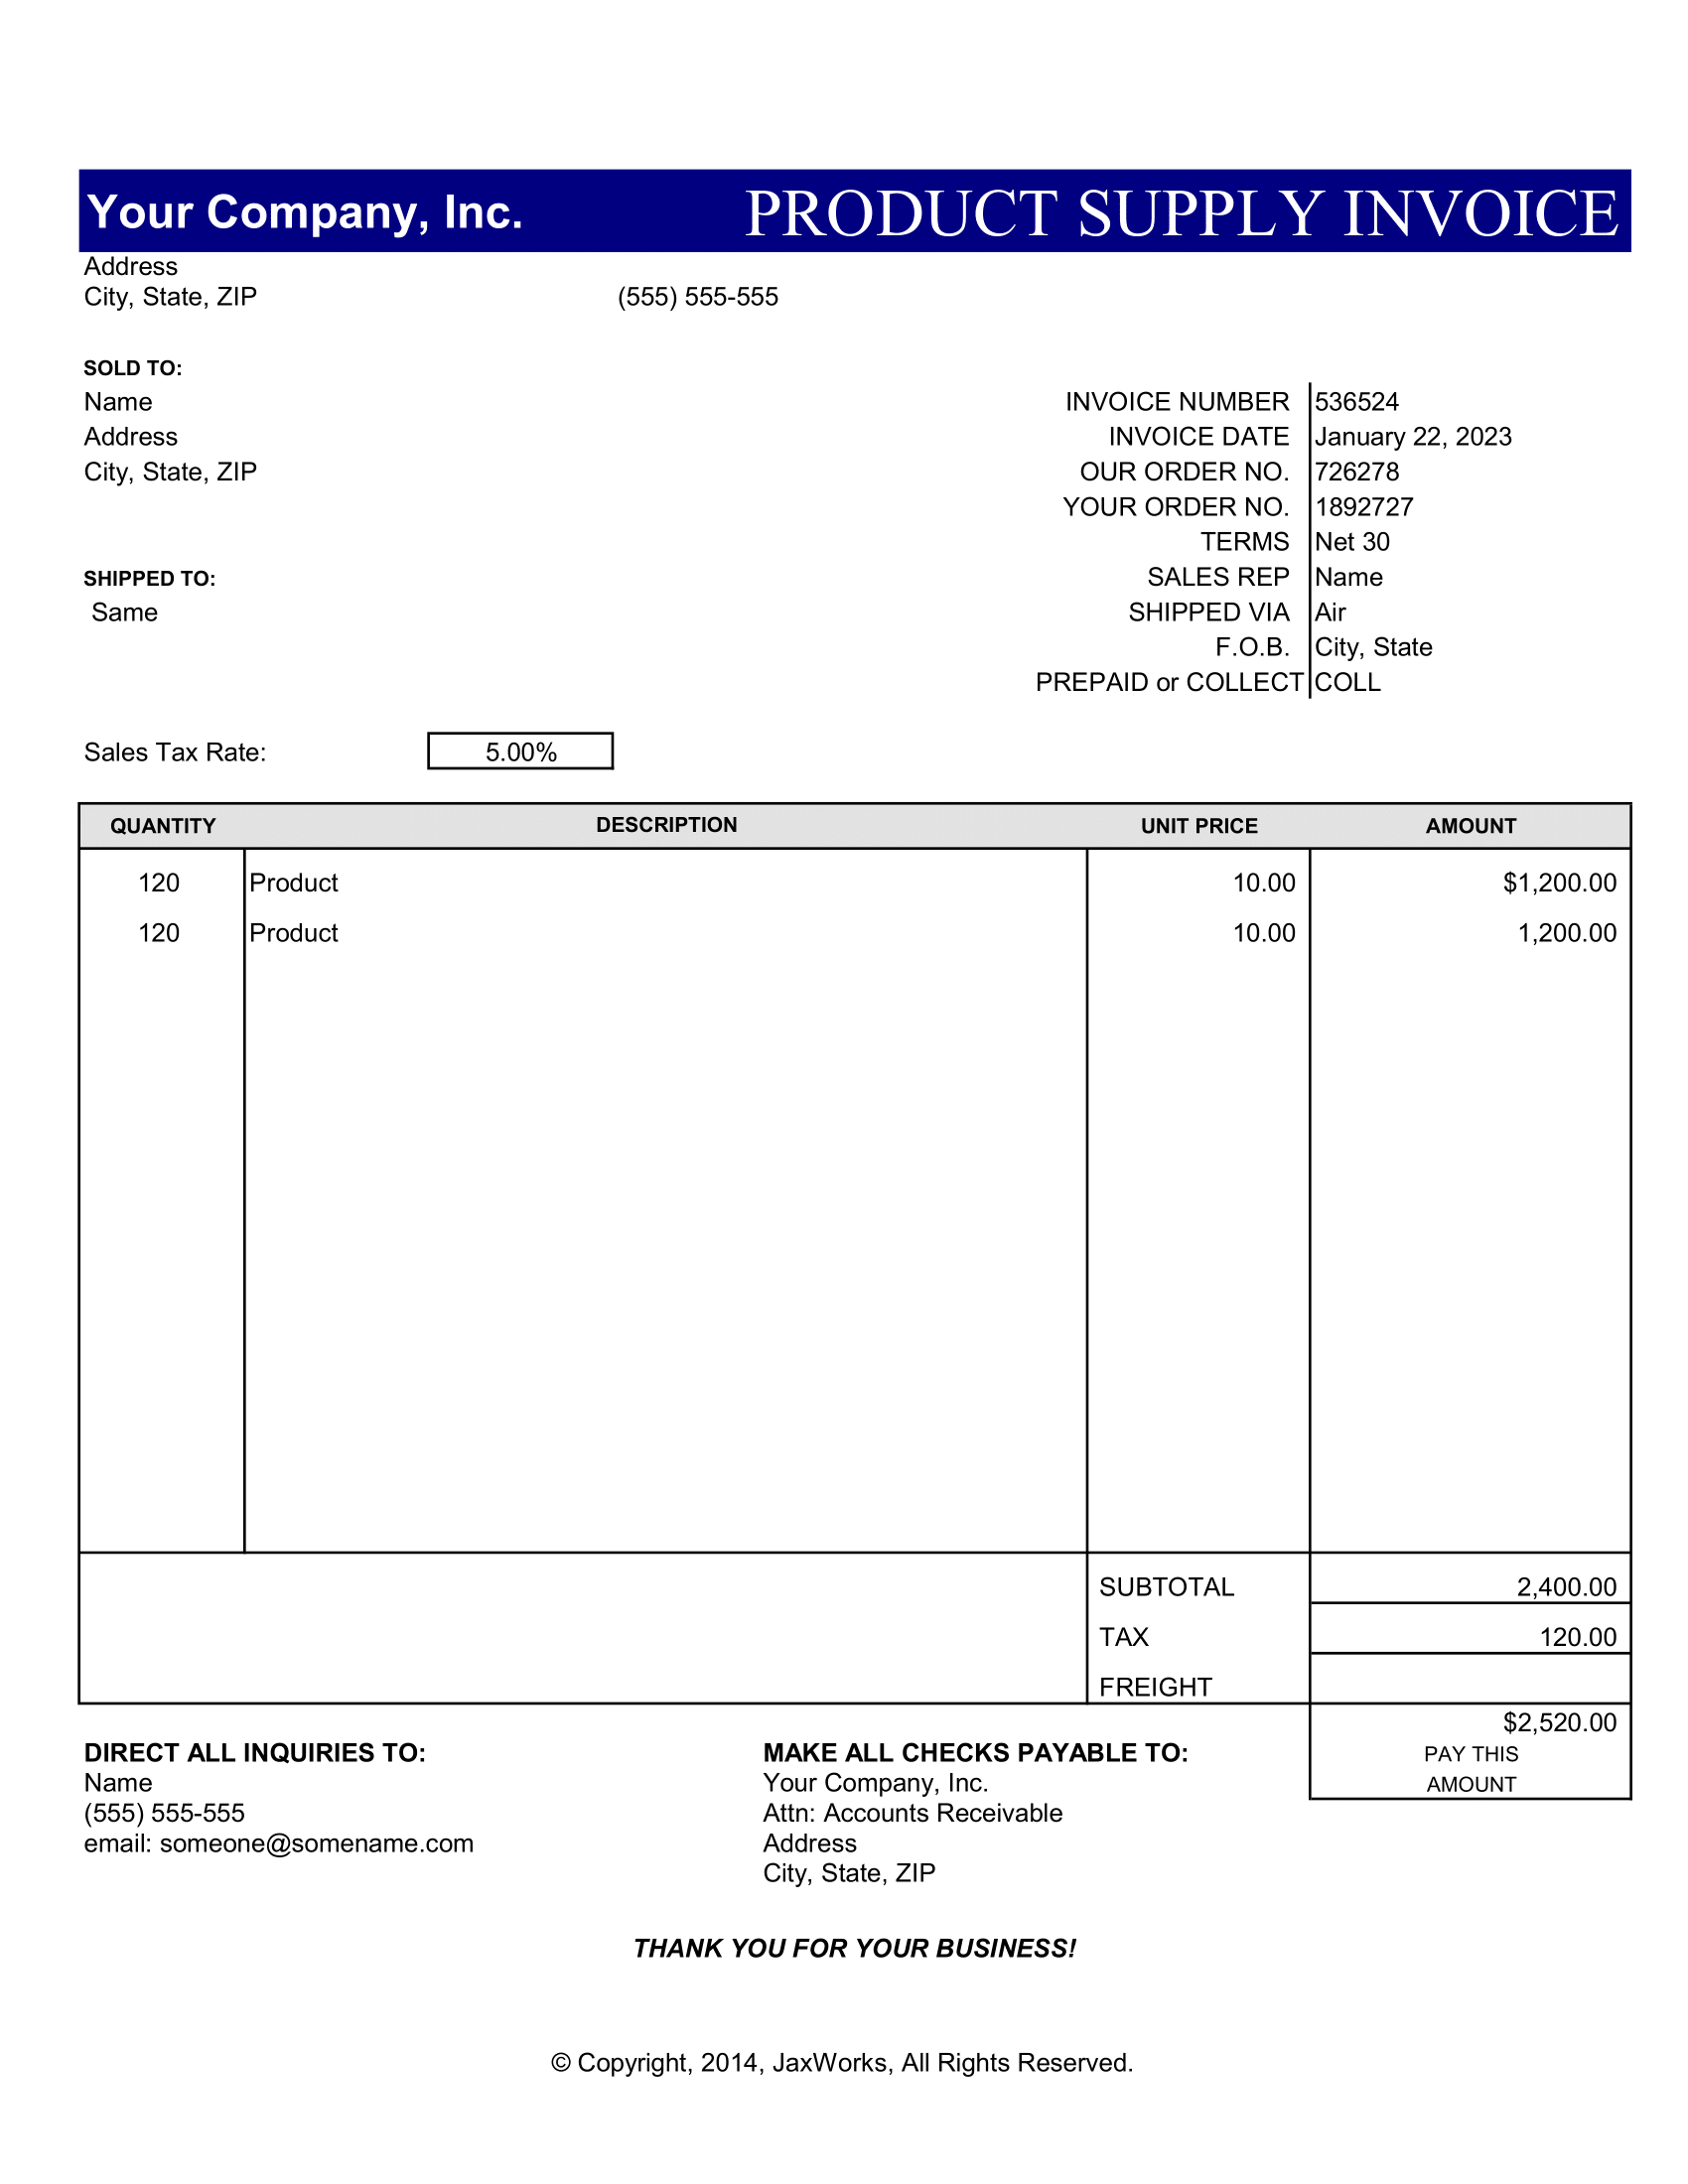 Product Supply Invoice